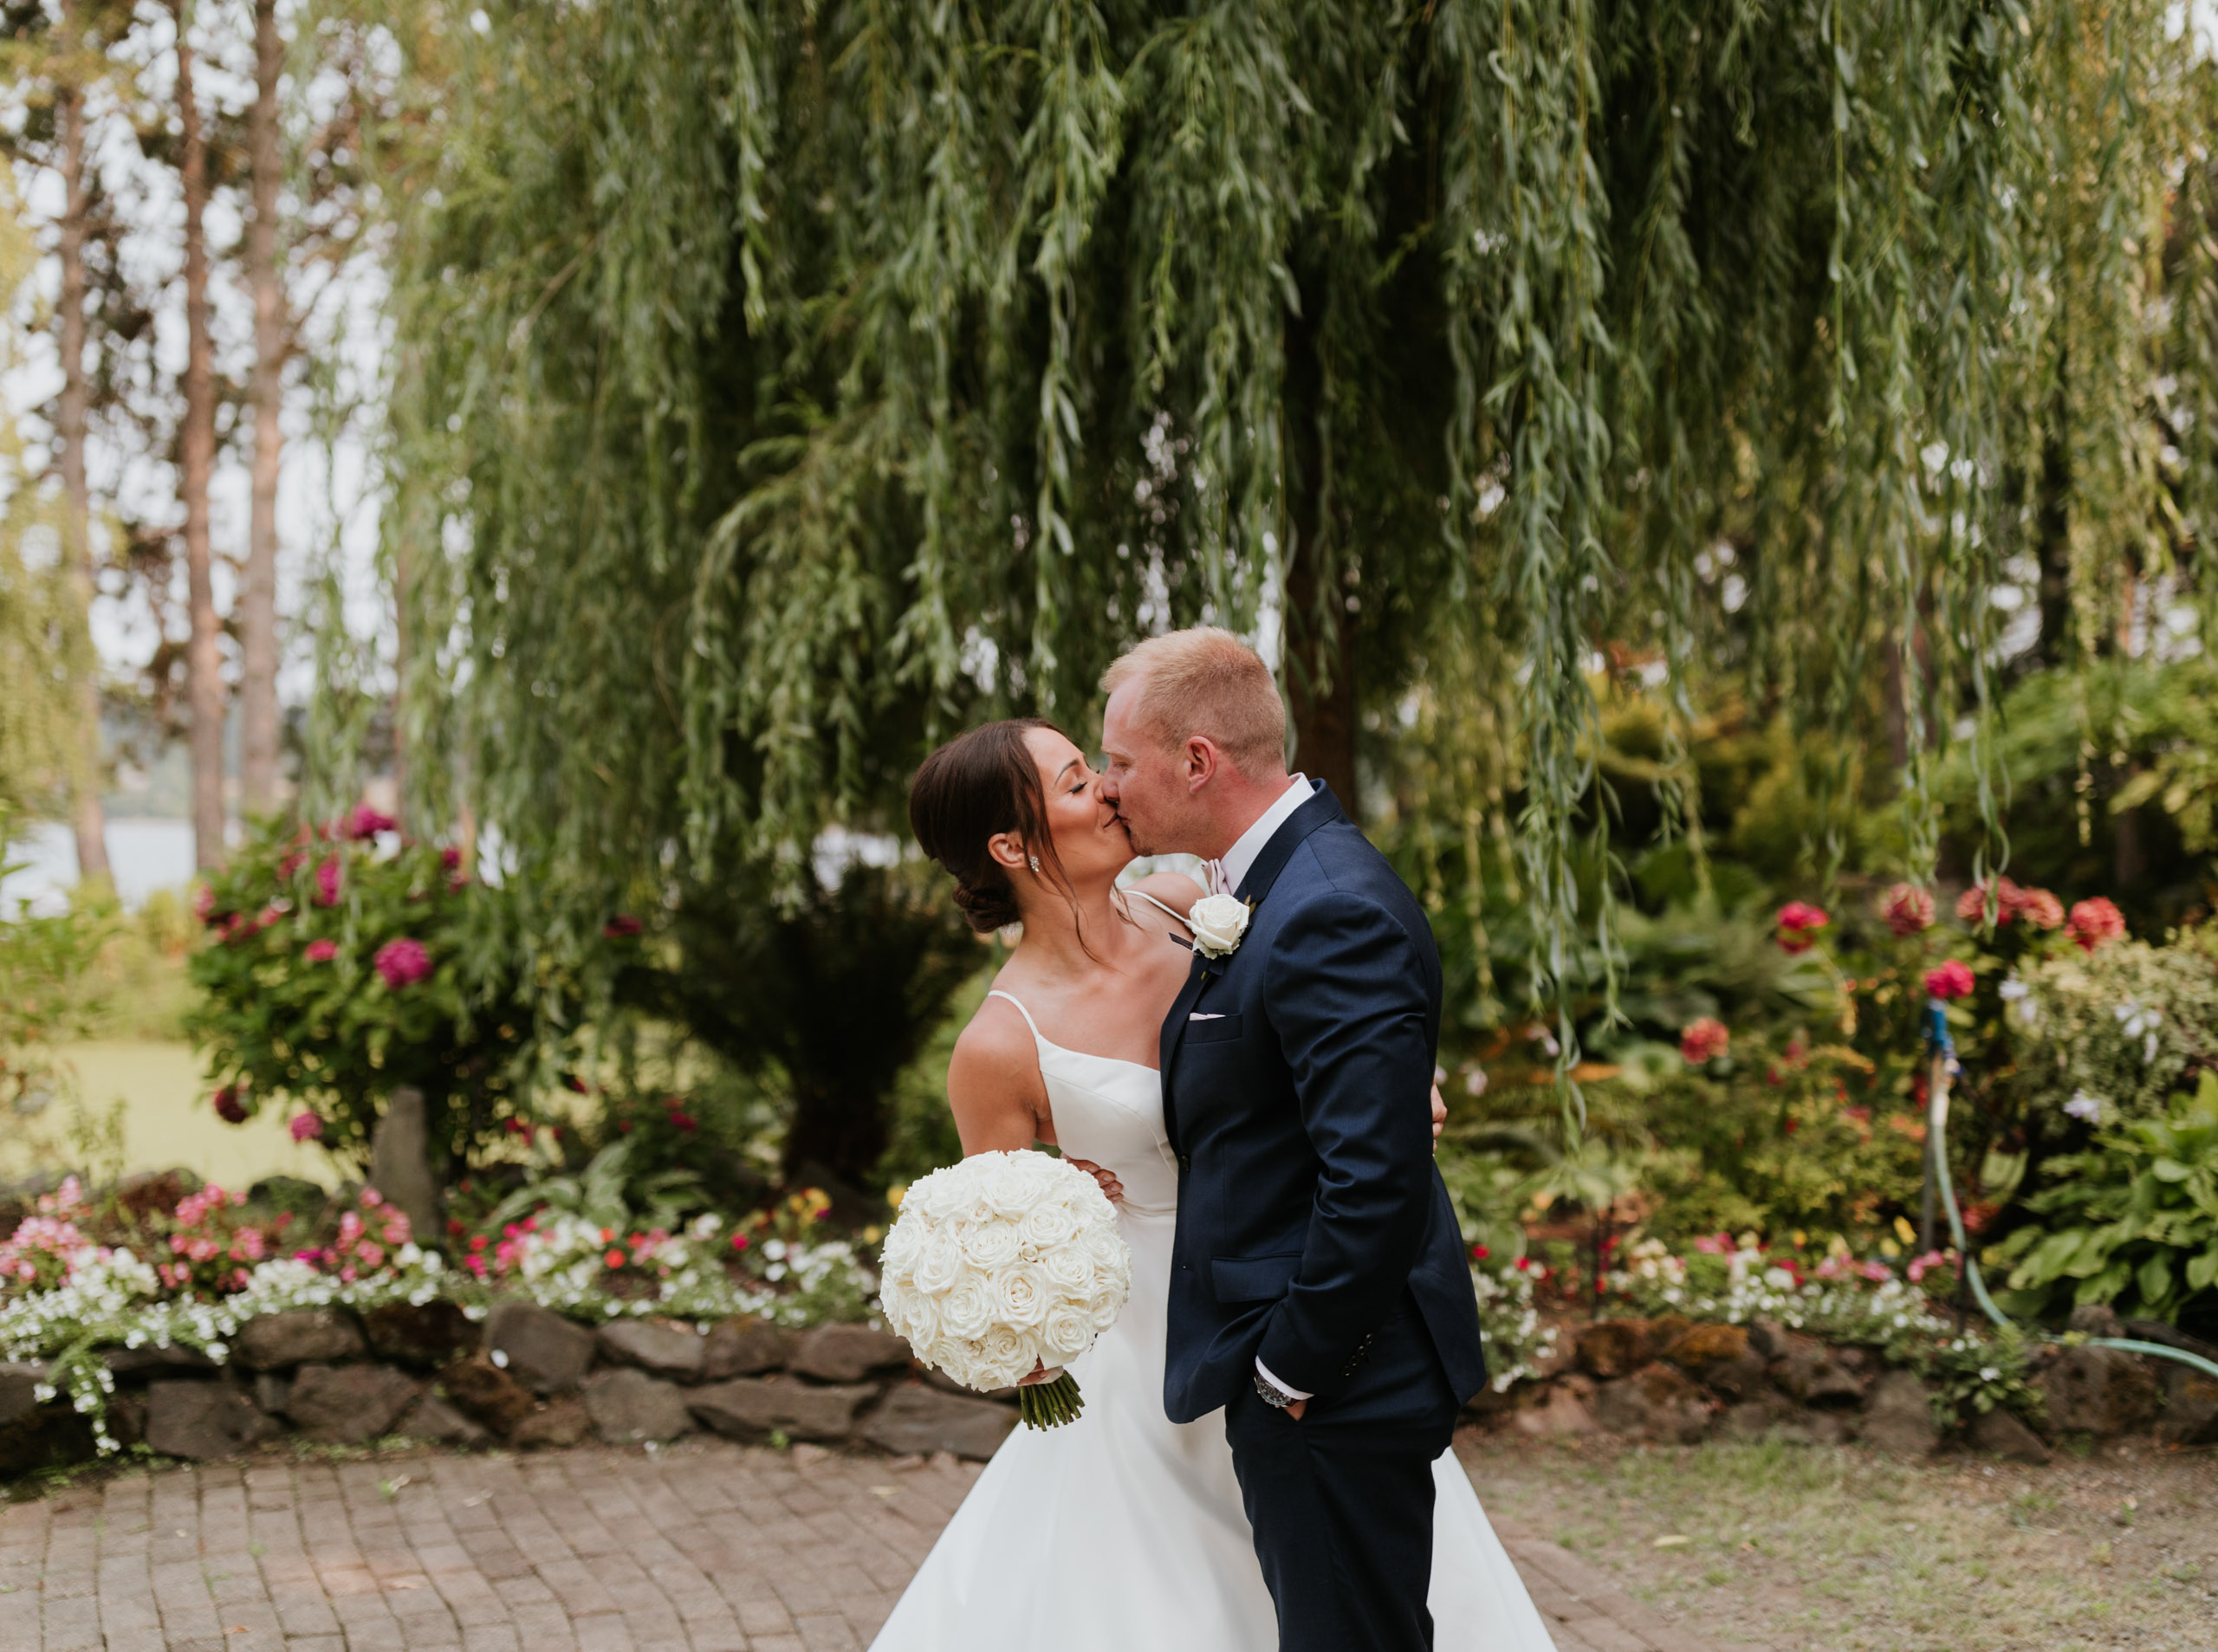 https://breannapluskevin.com/wp-content/uploads/photo-gallery/imported_from_media_libray/kiana-lodge-wedding-bm-breanna-plus-kevin-[01-99].jpg